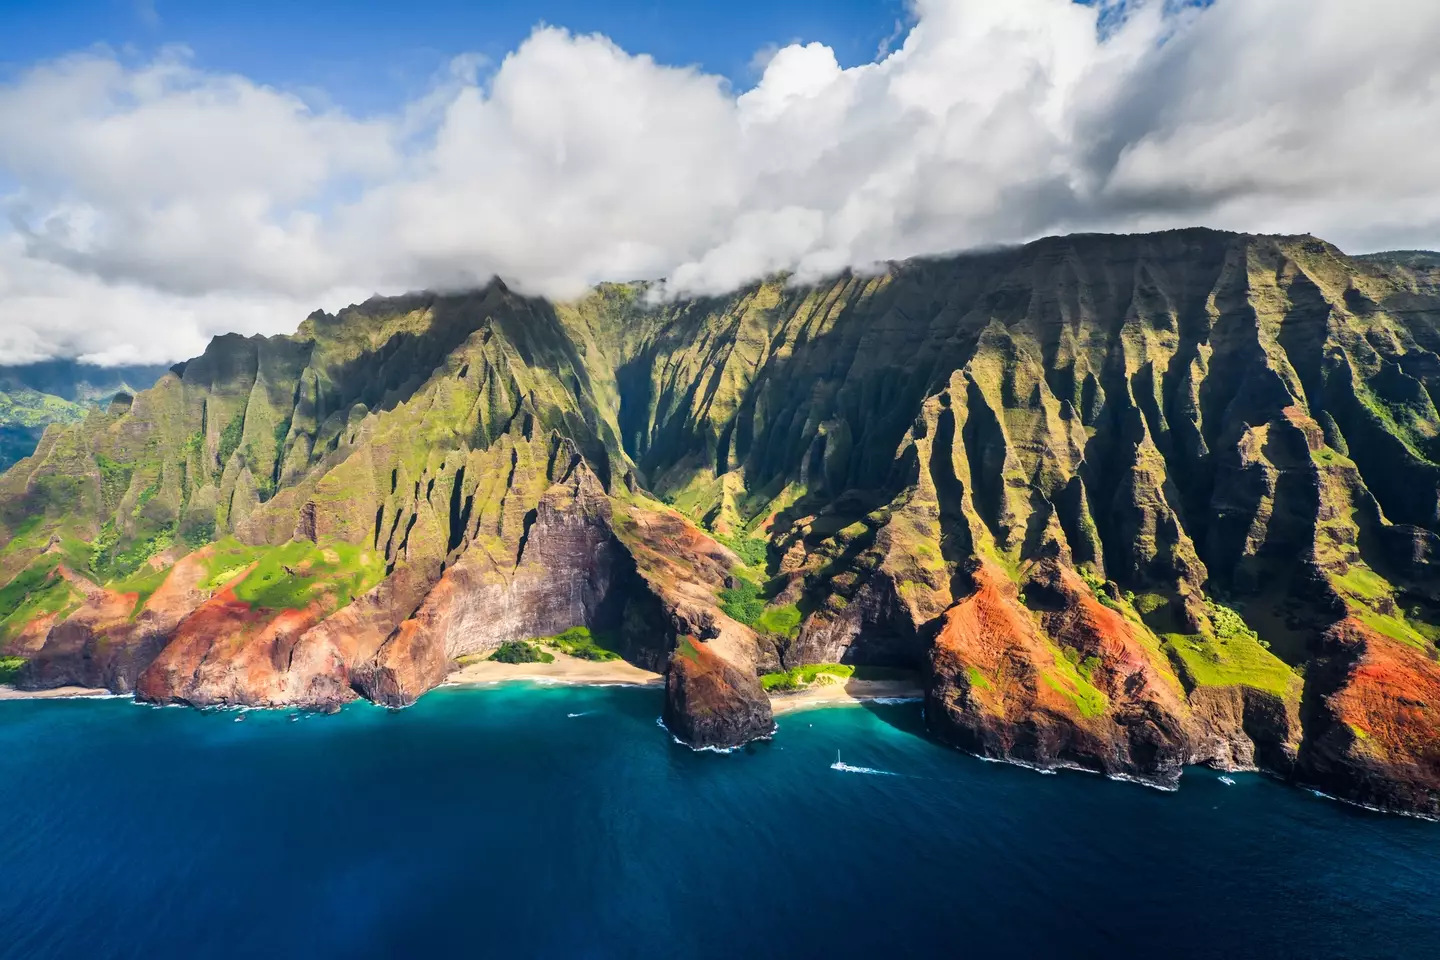 Hawaii formed as a result of a volcanic eruption.